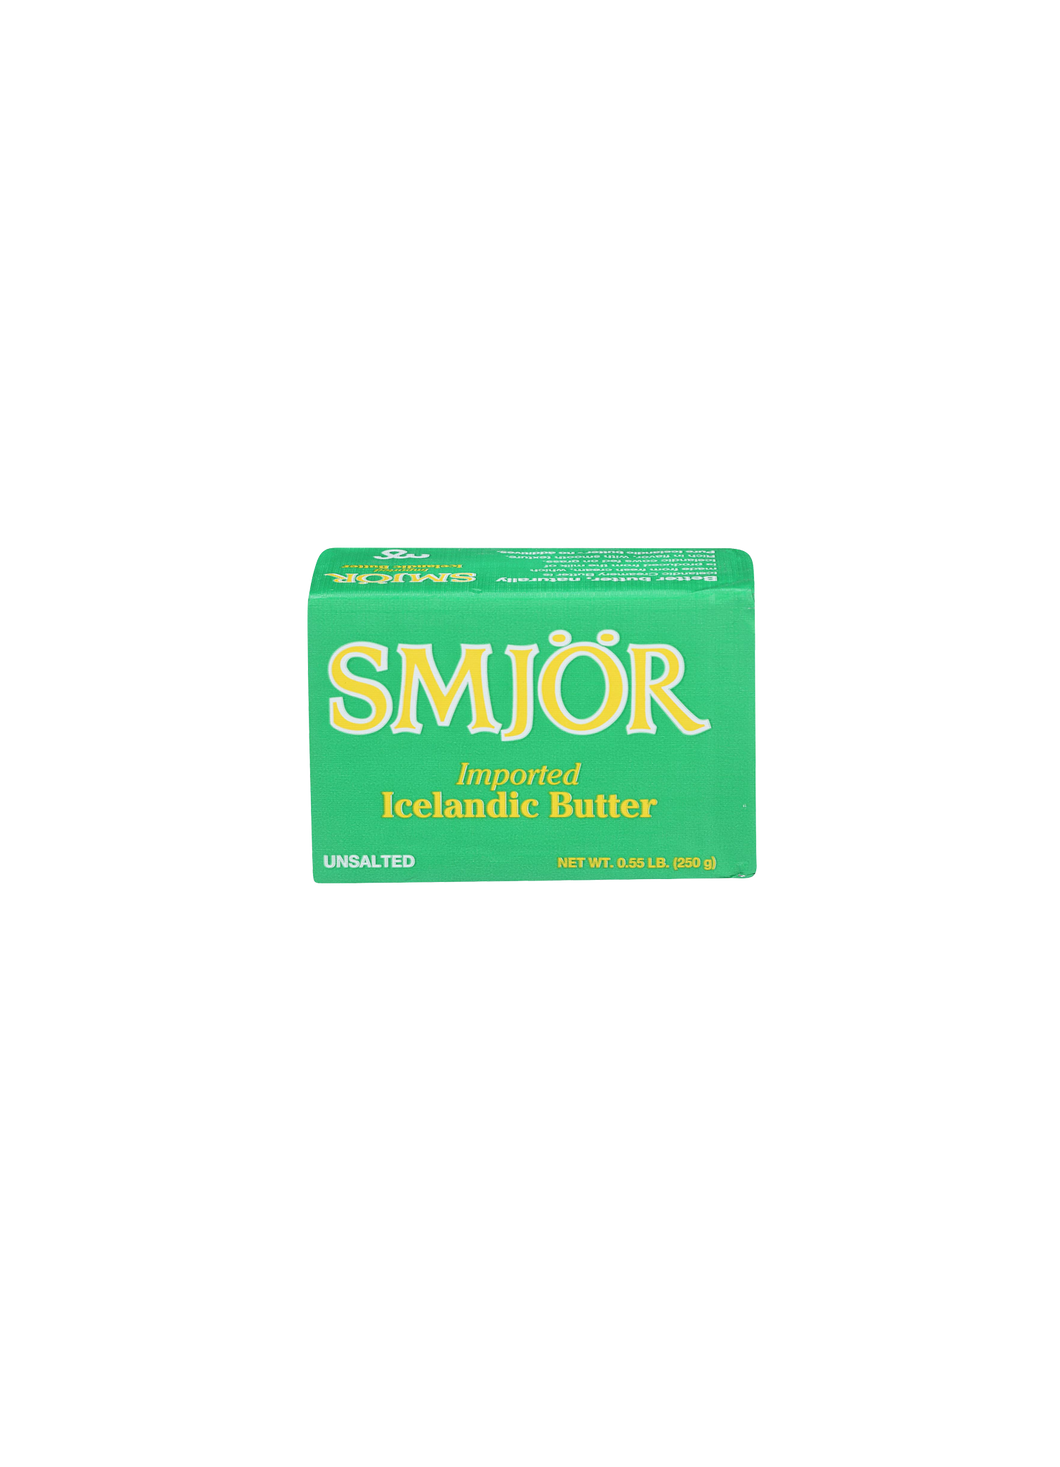 SMJOR Imported Icelandic Butter Unsalted 250g